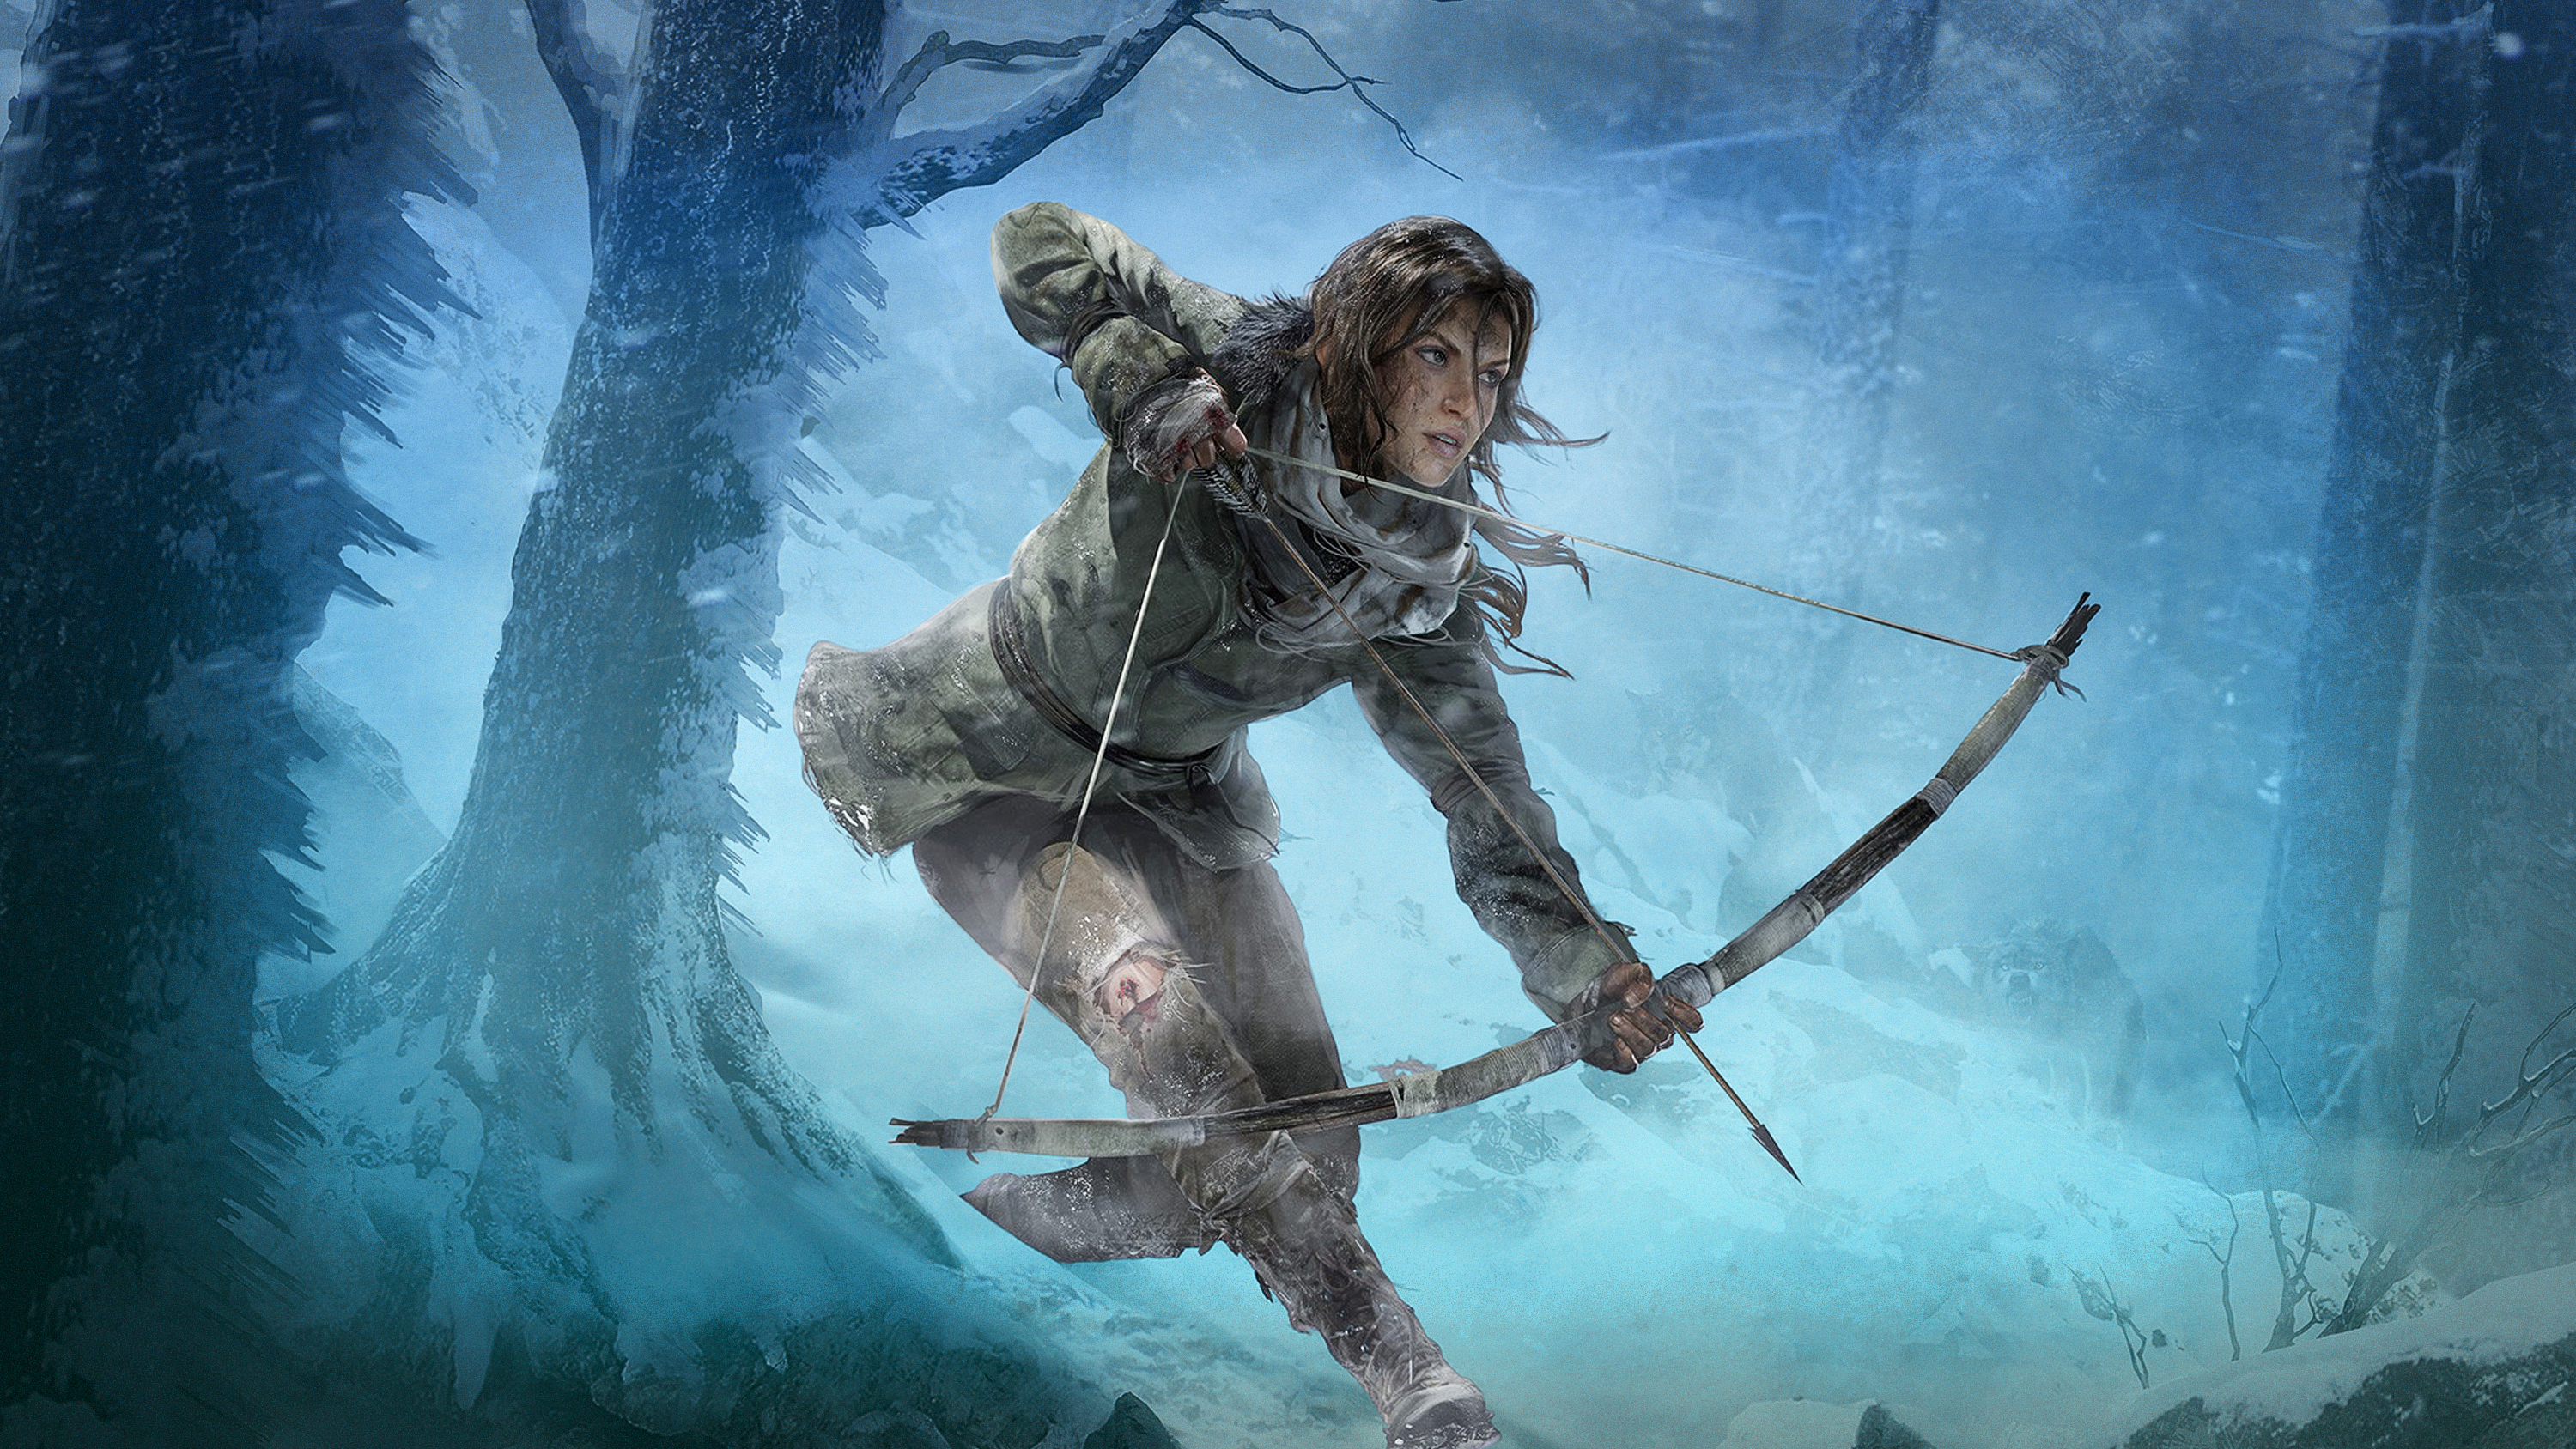 Lara Croft character running through snowy woods and drawing a bow